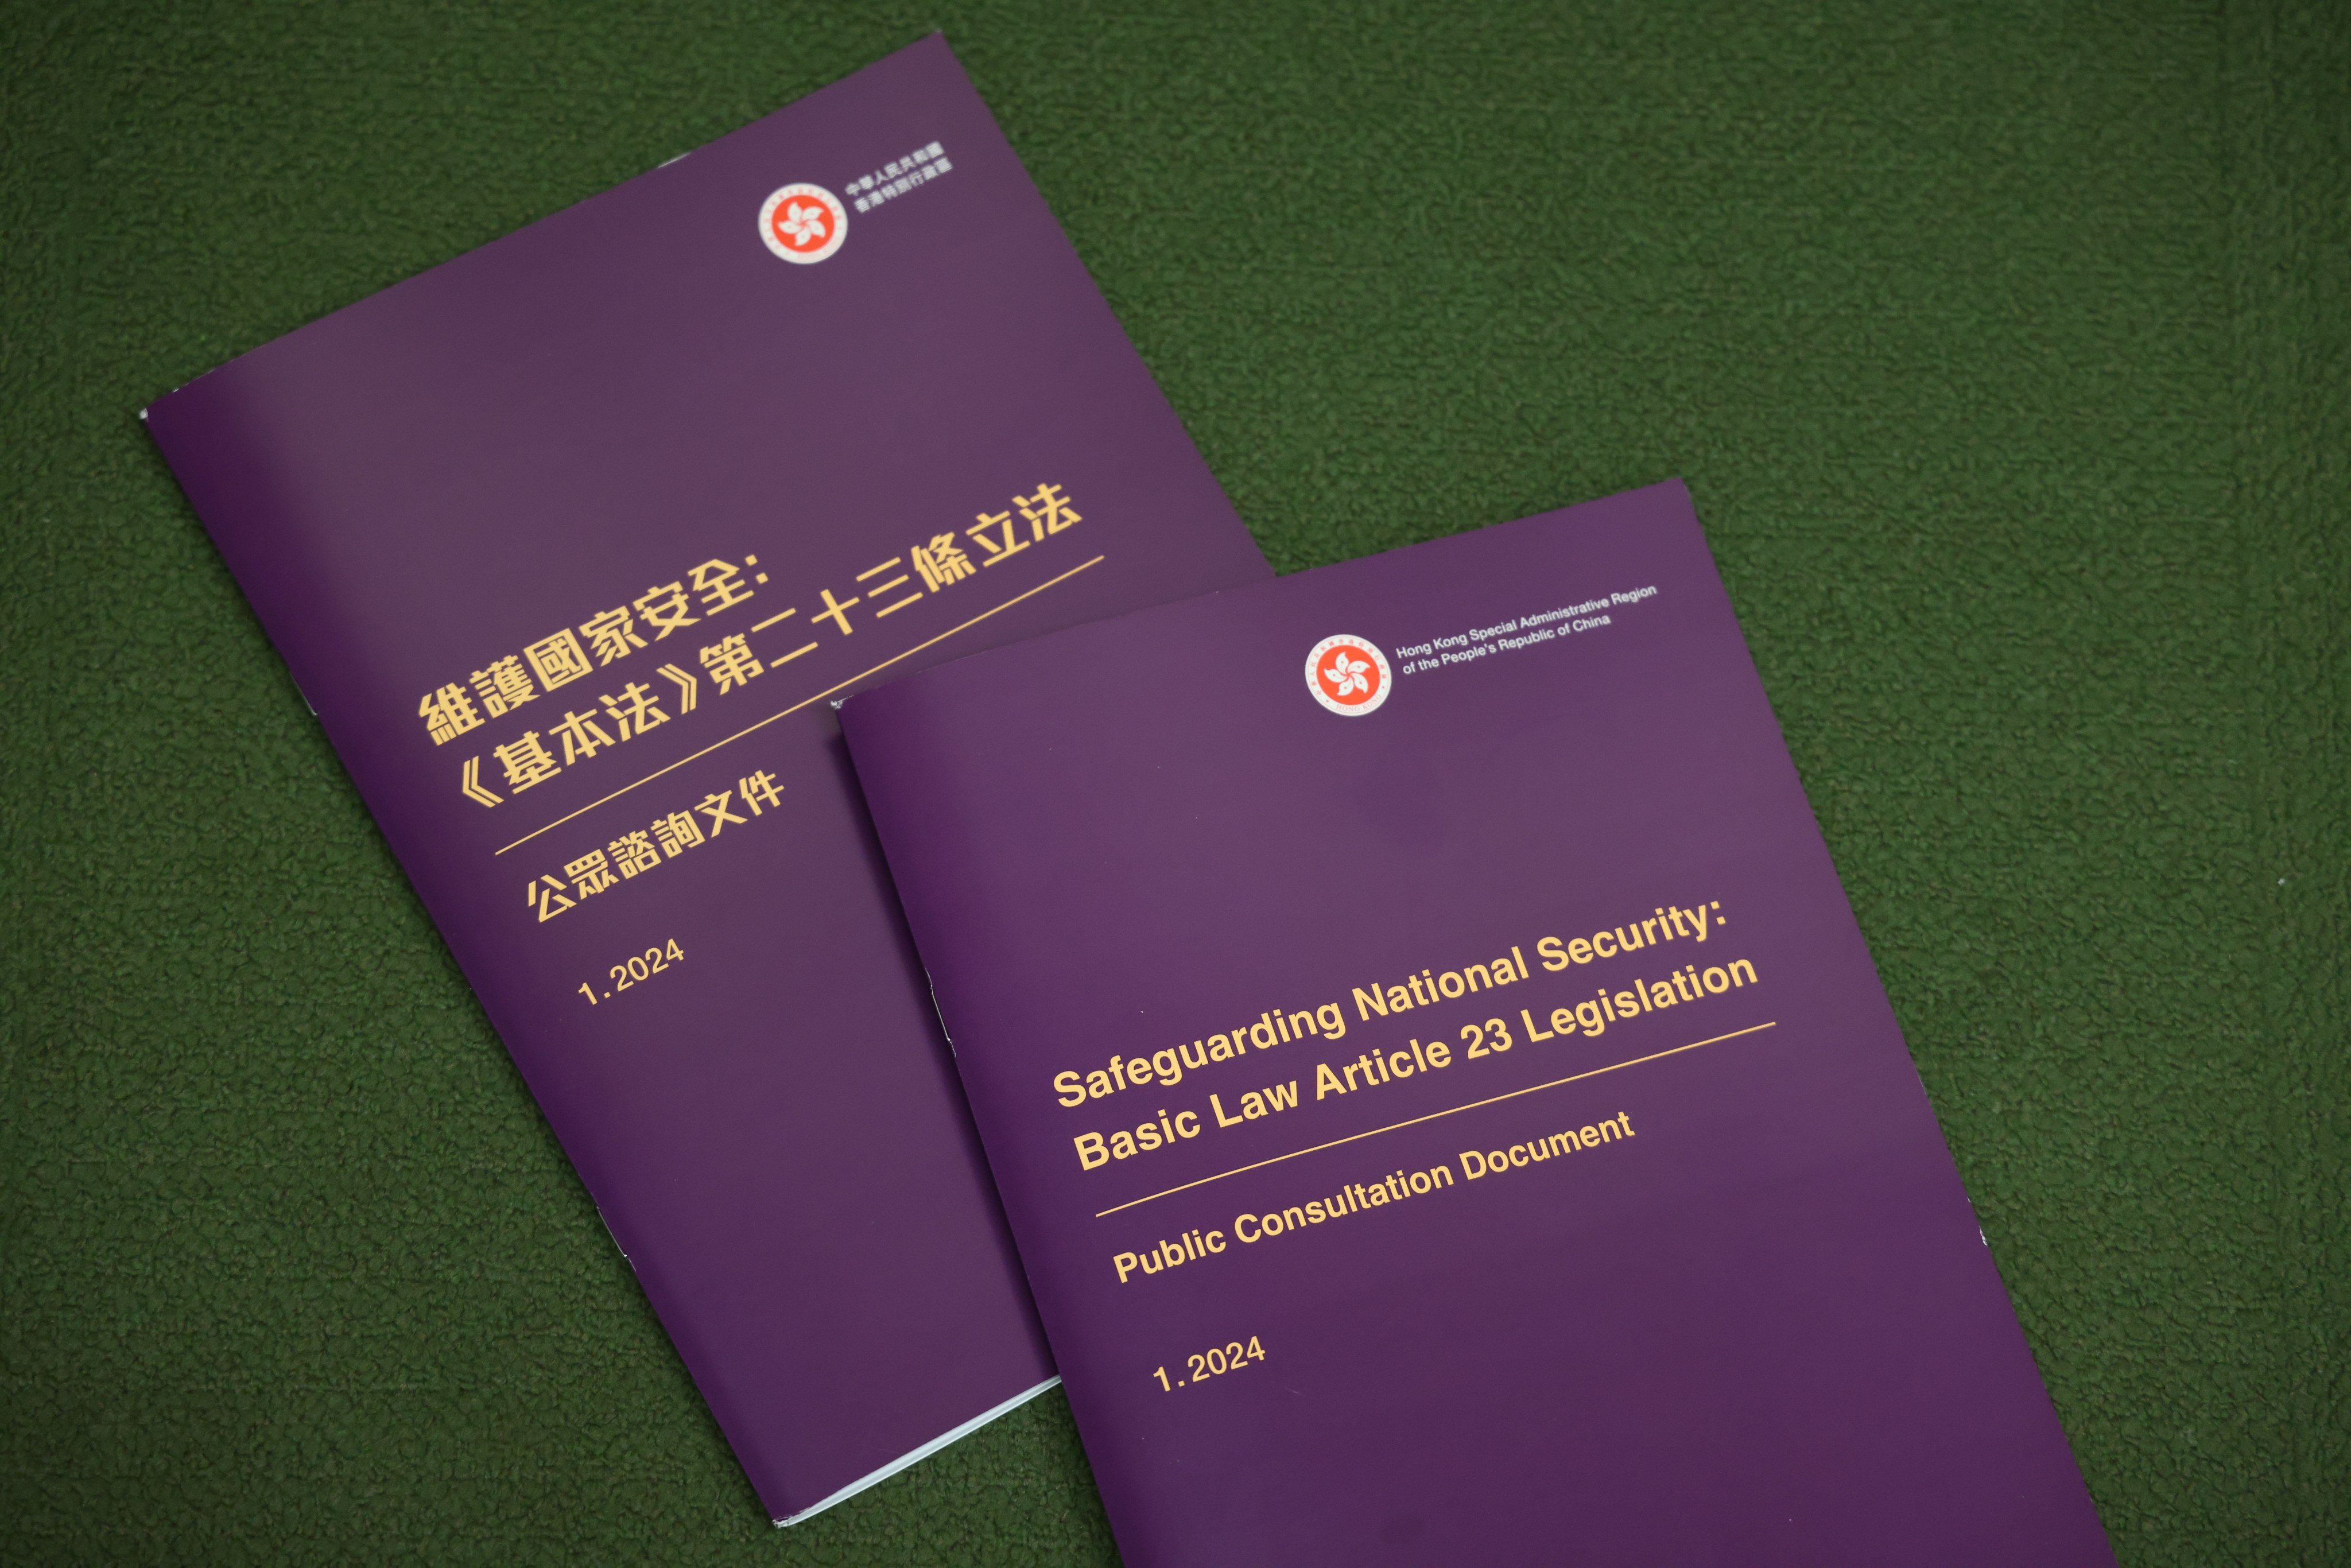 A public consultation document for the city’s domestic national security law. The government has hit back at criticism from the US about the legislation. Photo: Jelly Tse